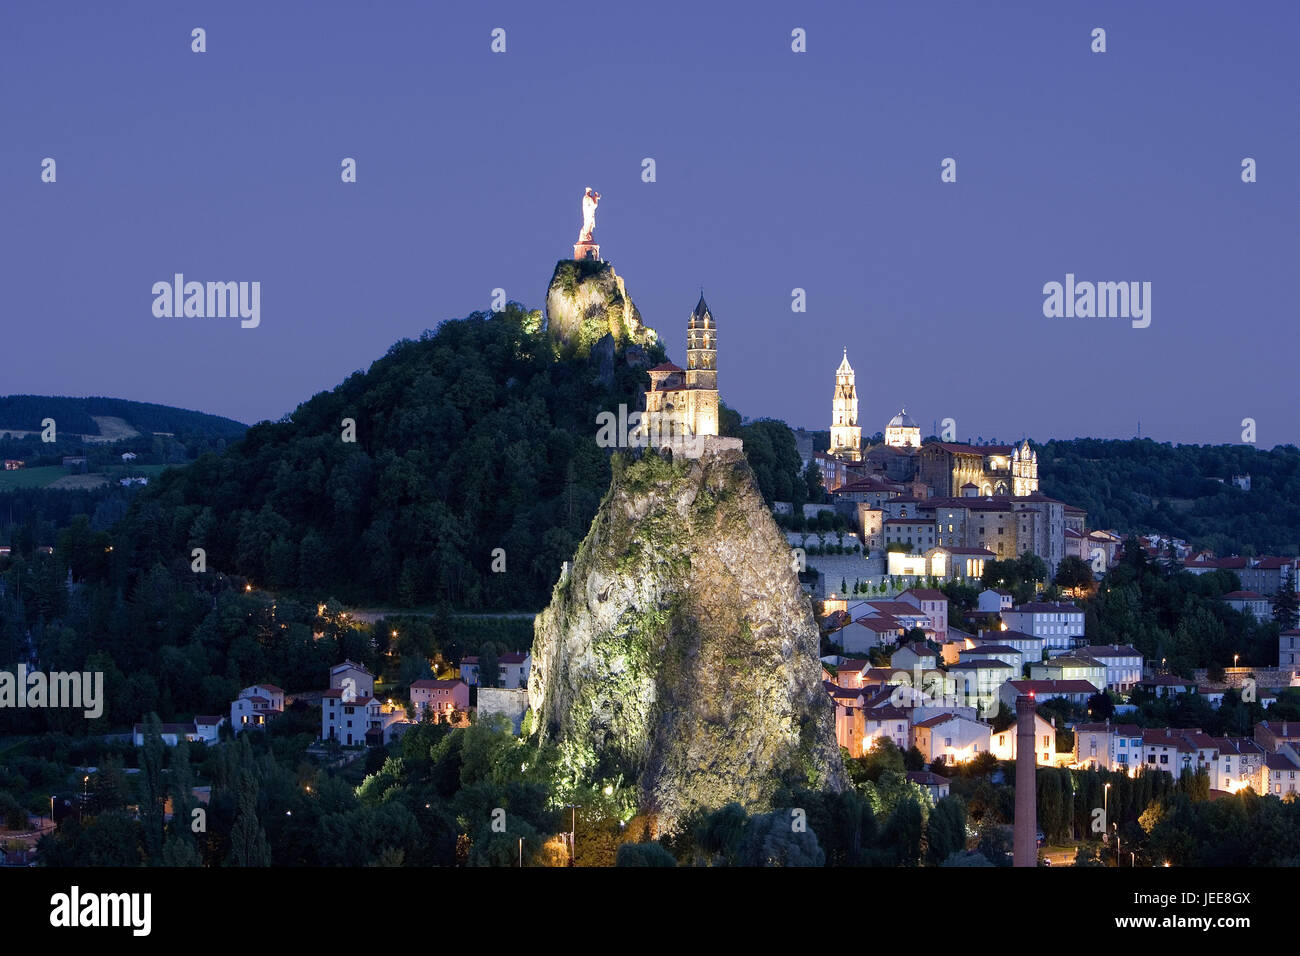 France, Le Puy-en-Velay, town view, churches, statue, lighting, evening, Europe, destination, place of interest, landmark, culture, UNESCO-world cultural heritage, volcano cone, volcano needle, rock, Marien's statue, madonna figure, band, church, cathedral, churches, sacred setting, lights, Stock Photo